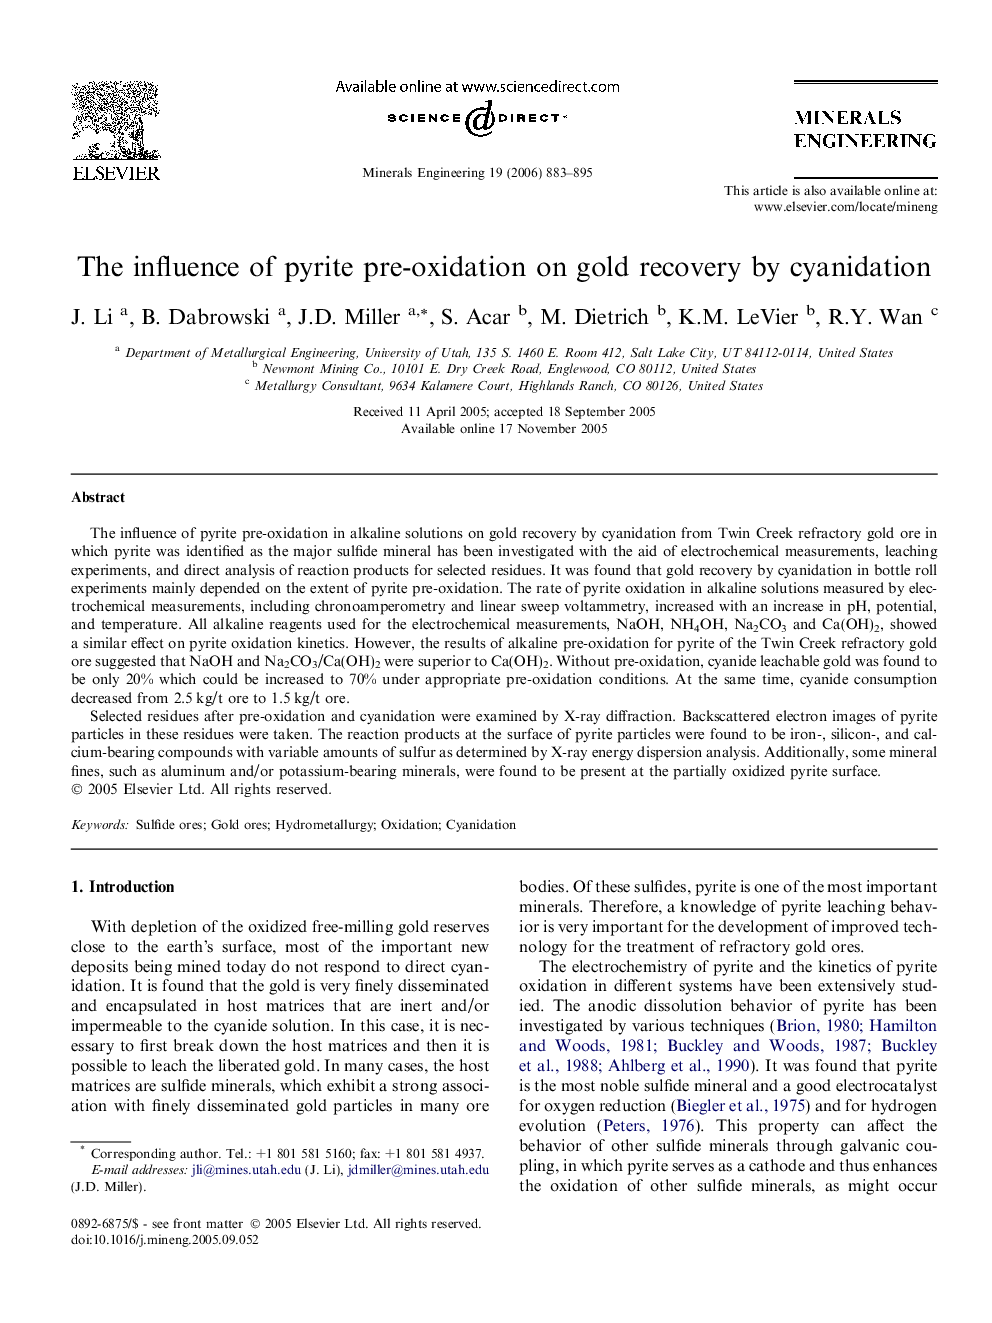 The influence of pyrite pre-oxidation on gold recovery by cyanidation